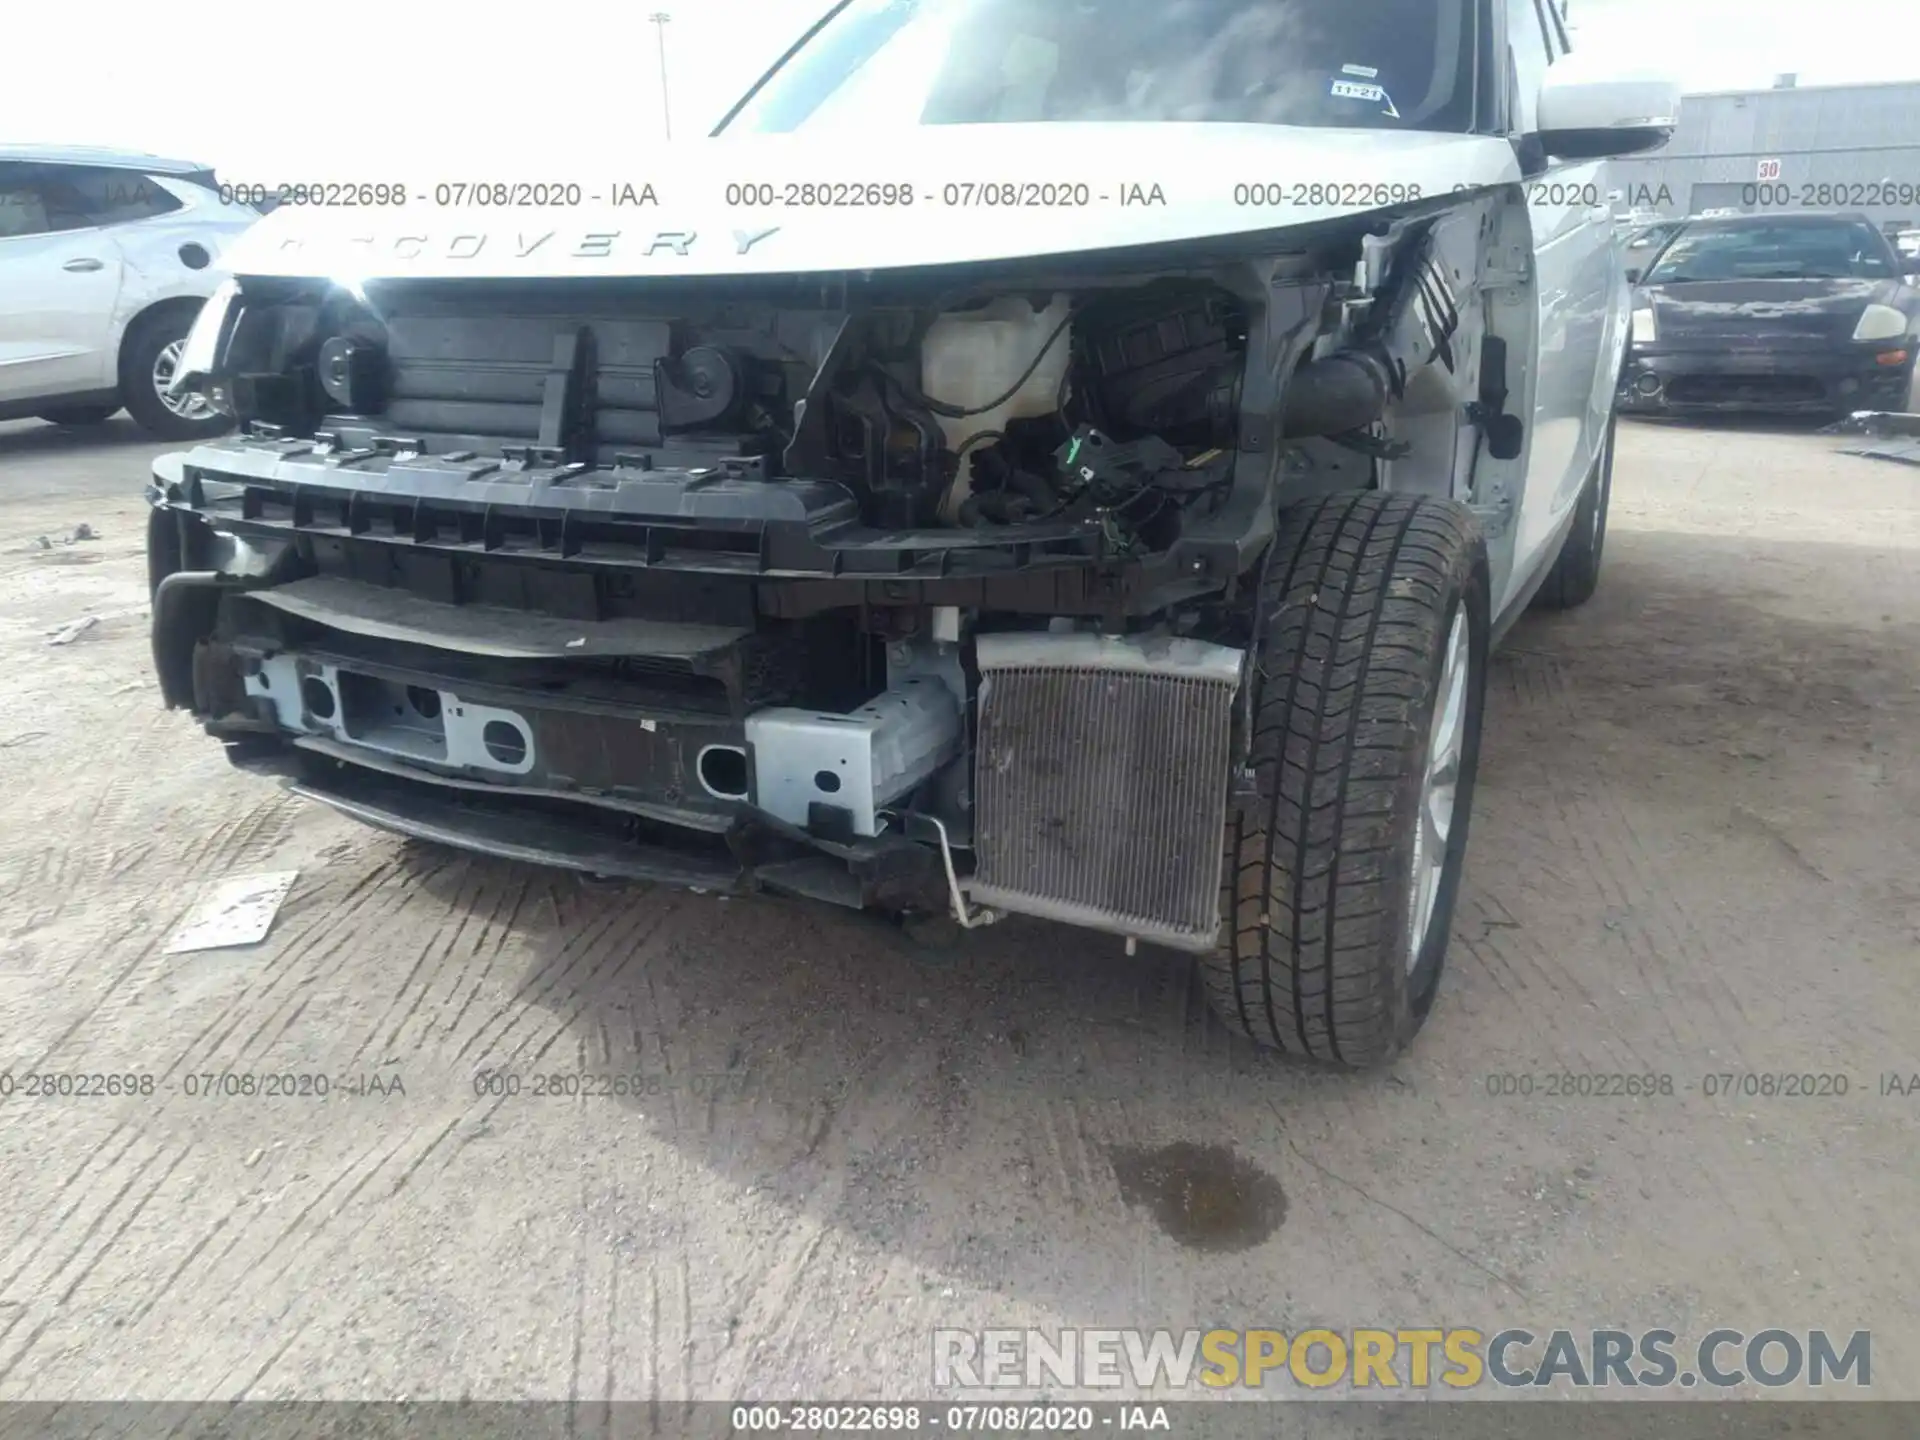 6 Photograph of a damaged car SALRG2RV3L2426232 LAND ROVER DISCOVERY 2020